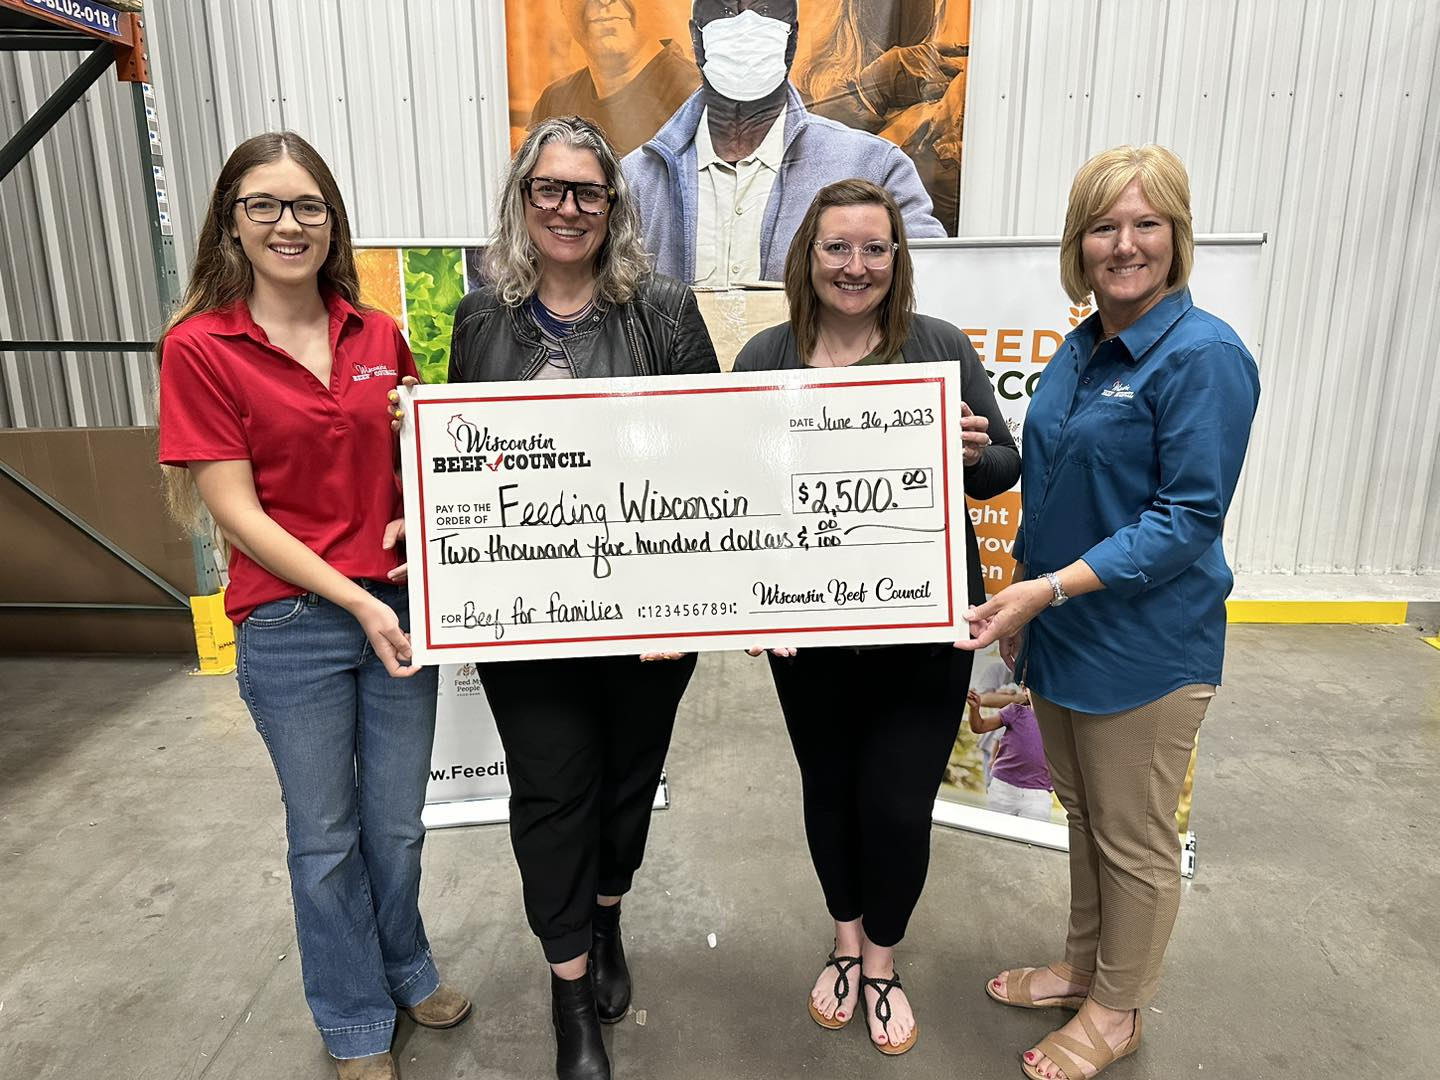 Beef Council Gives $2,500 To Feeding Wisconsin